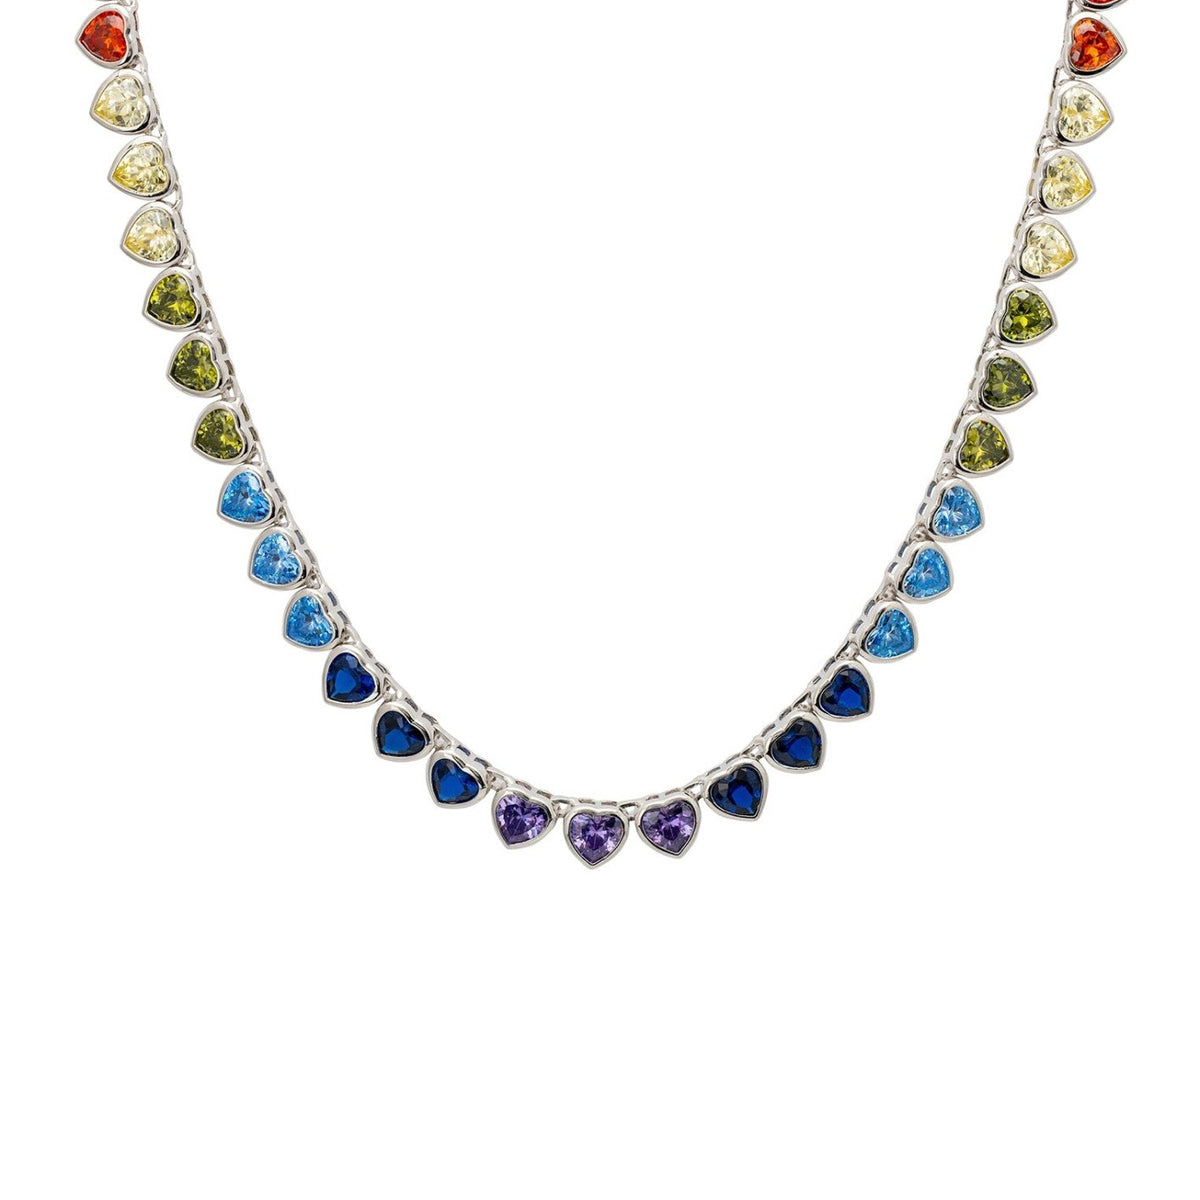 Necklace With Colored Boreal Heart Gems. the Magnetic Jewel Turns